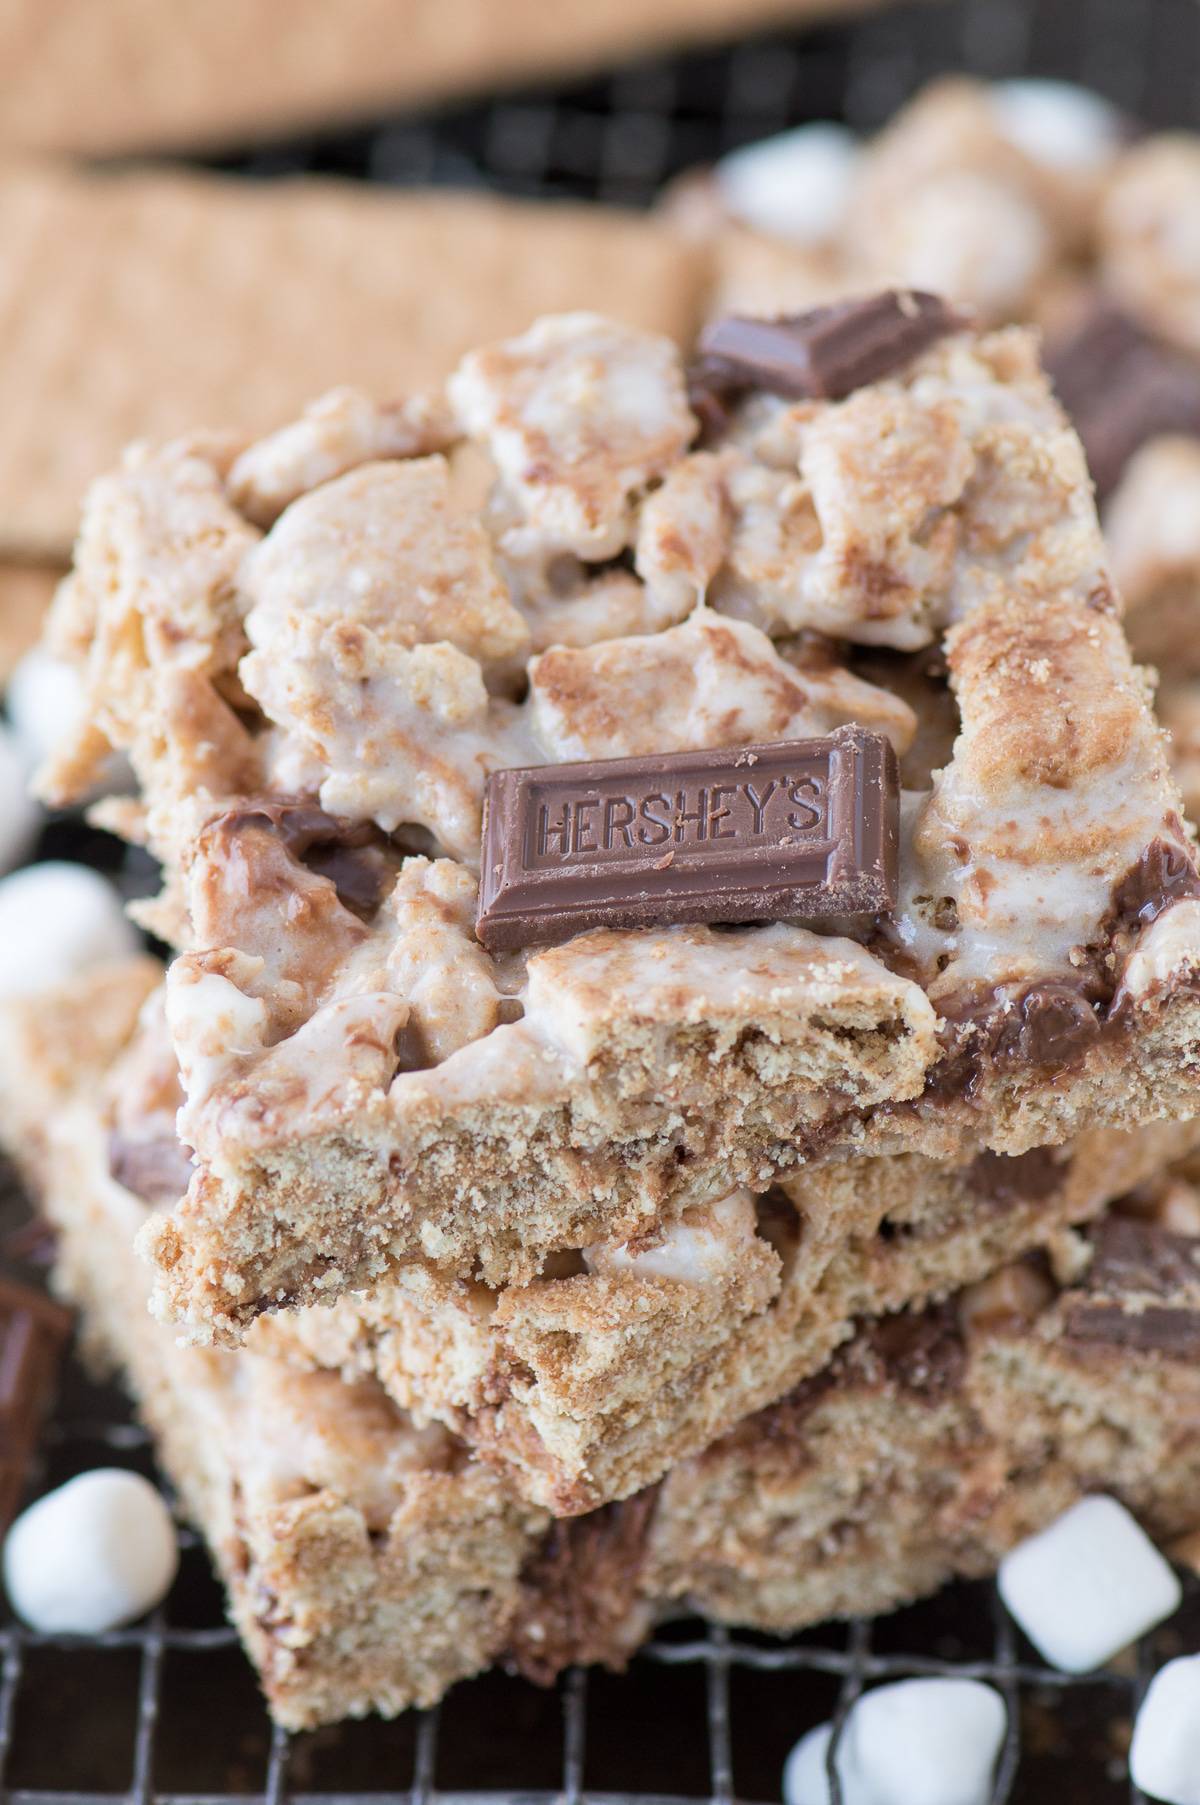 S’MORES BARS! Gooey marshmallow, graham cracker and chocolate s’mores bars! Like rice krispies but with graham crackers. This is the ultimate s’mores treat!